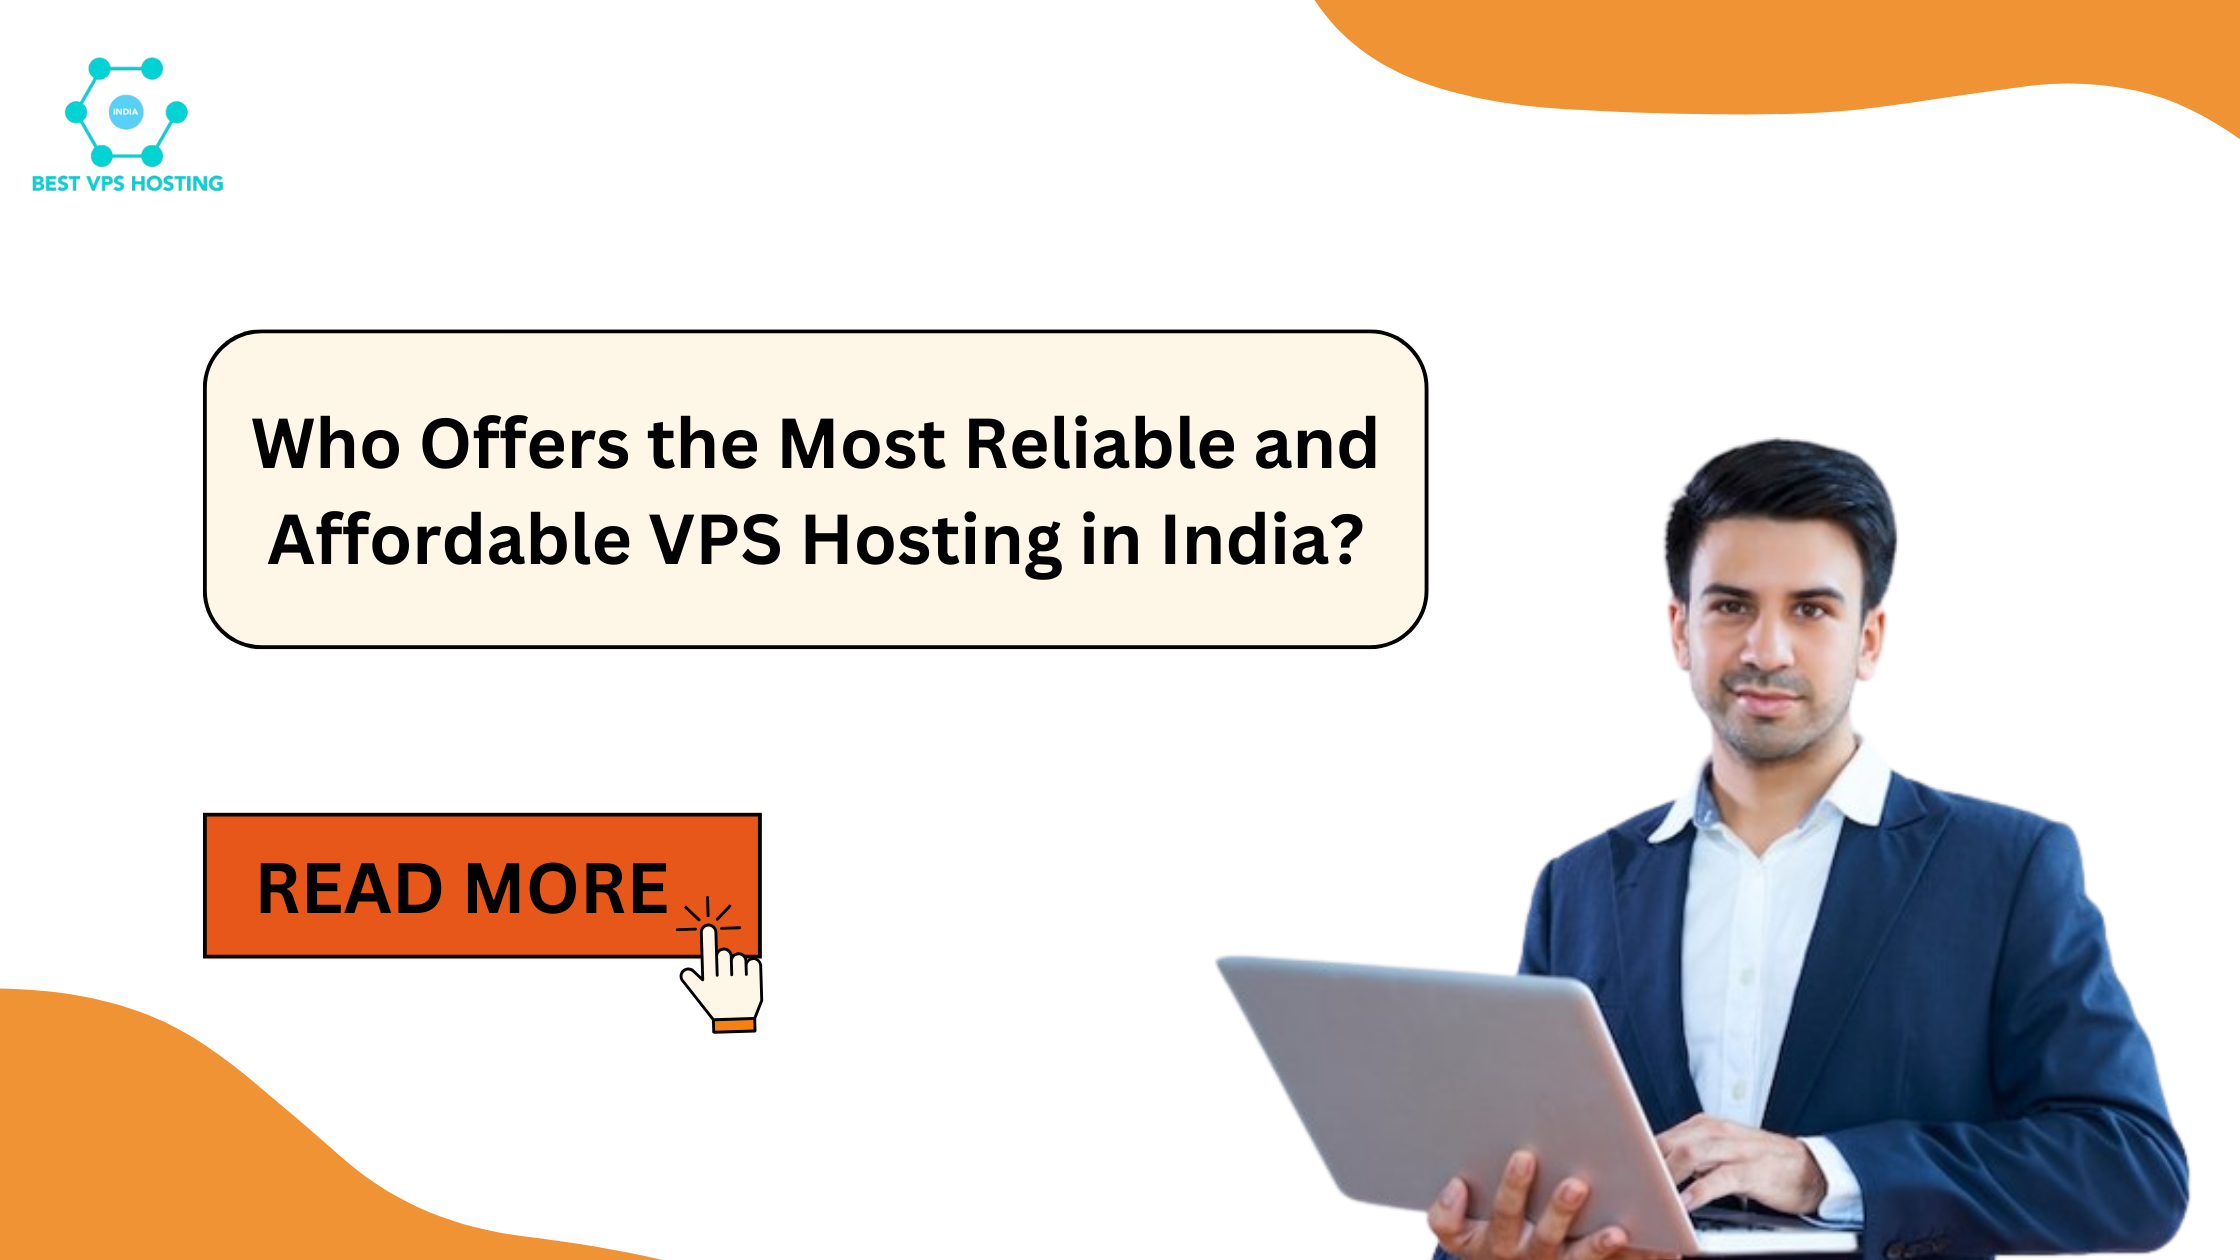 Who Offers the Most Reliable and Affordable VPS Hosting in India?